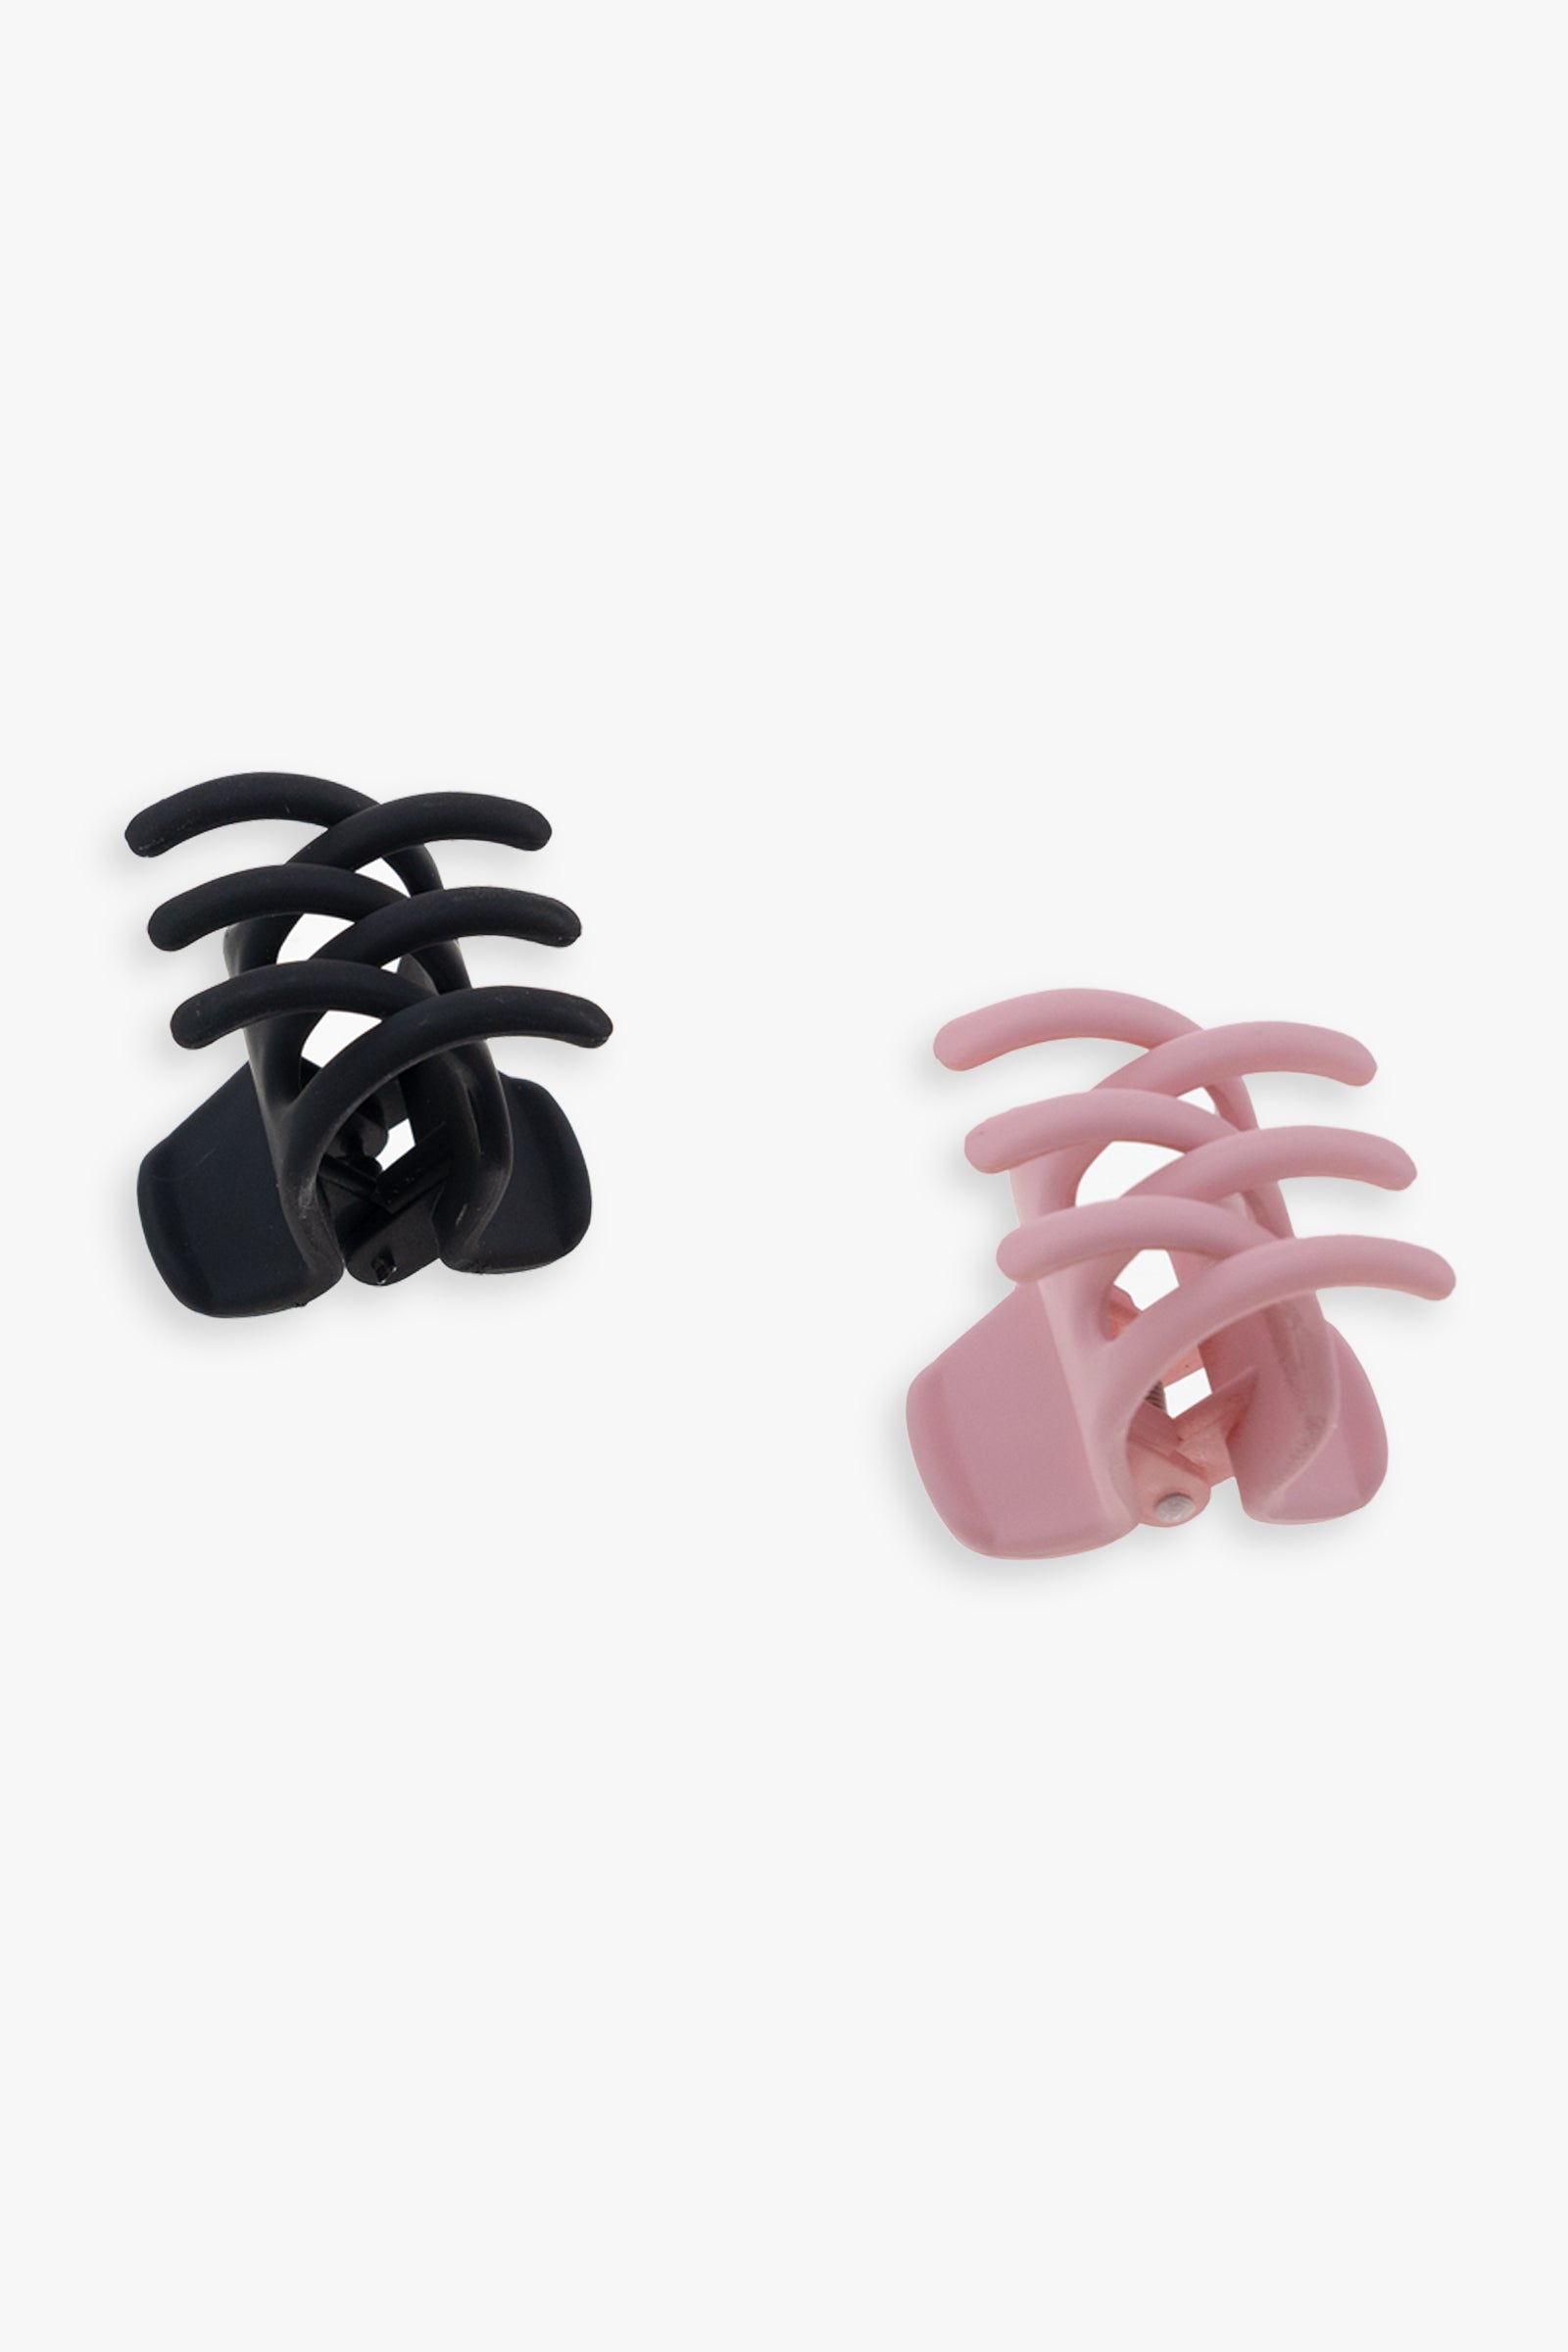 Sophi 8 Small Matte Hair Claw Clips Bundle in Multiple Colours